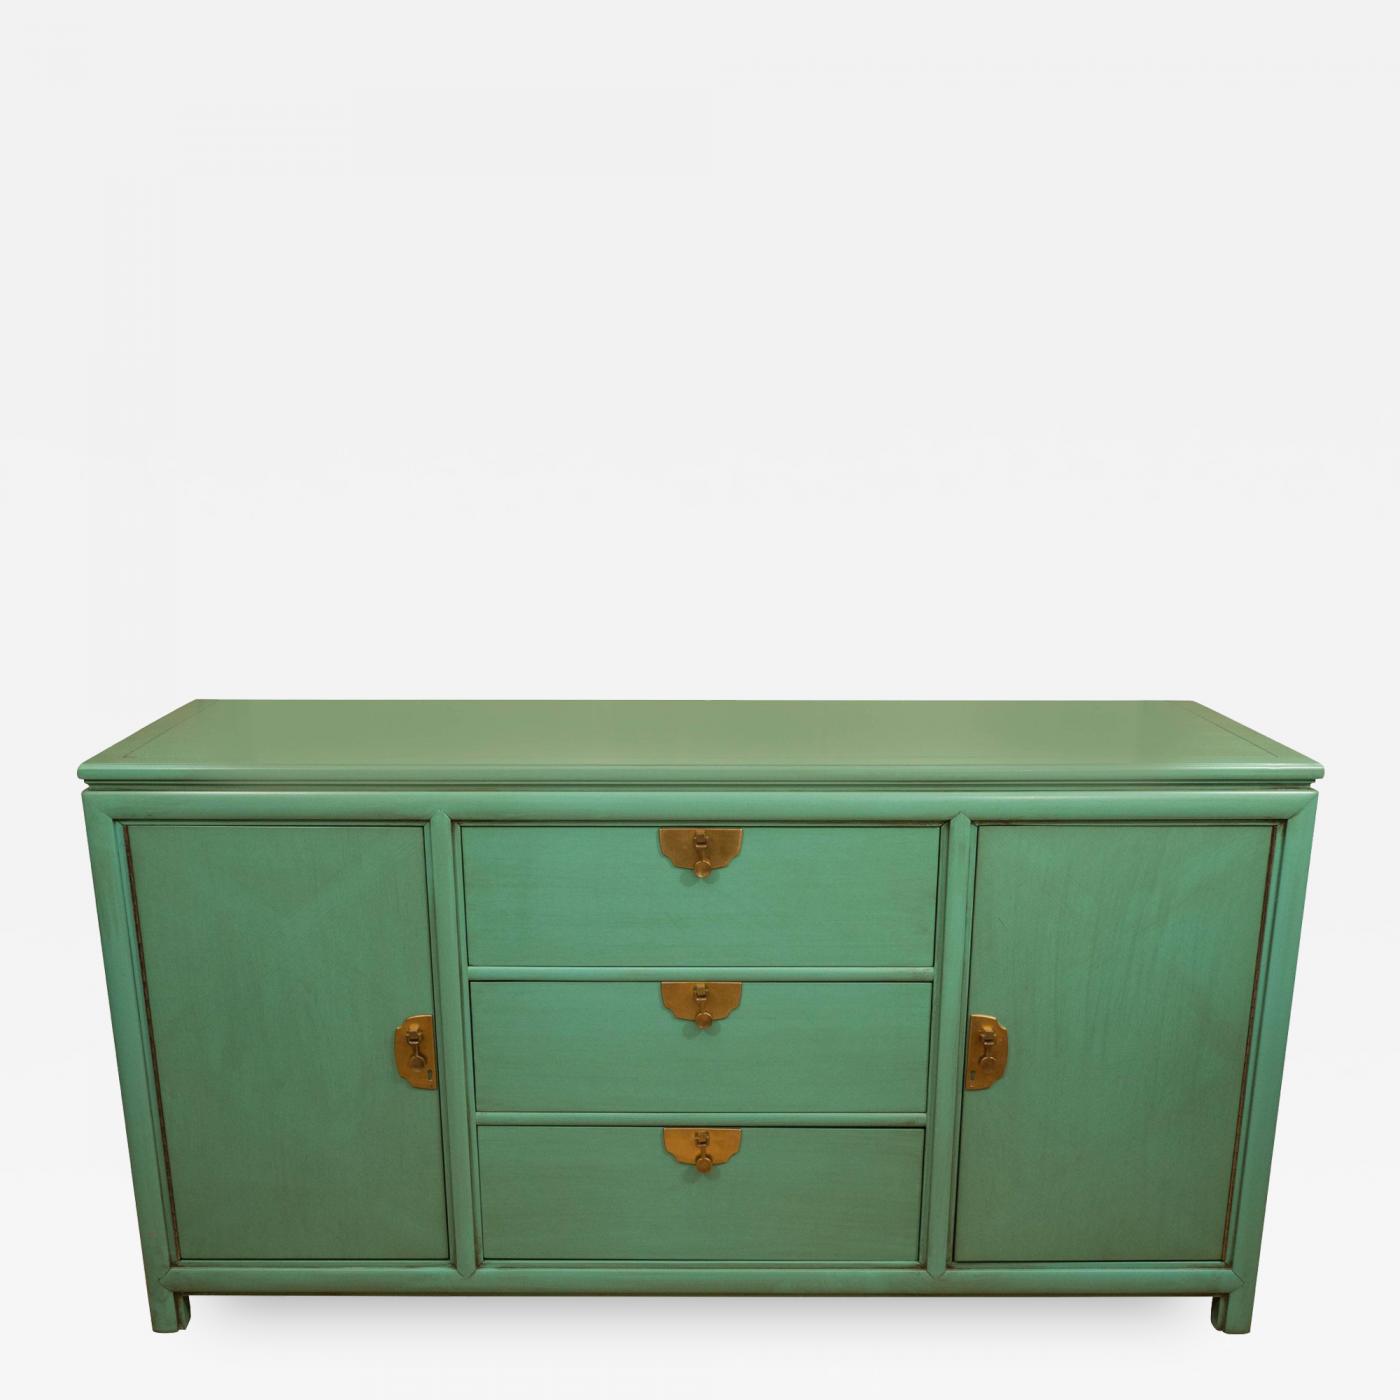 Thomasville Furniture Turquoise Chest By Thomasville